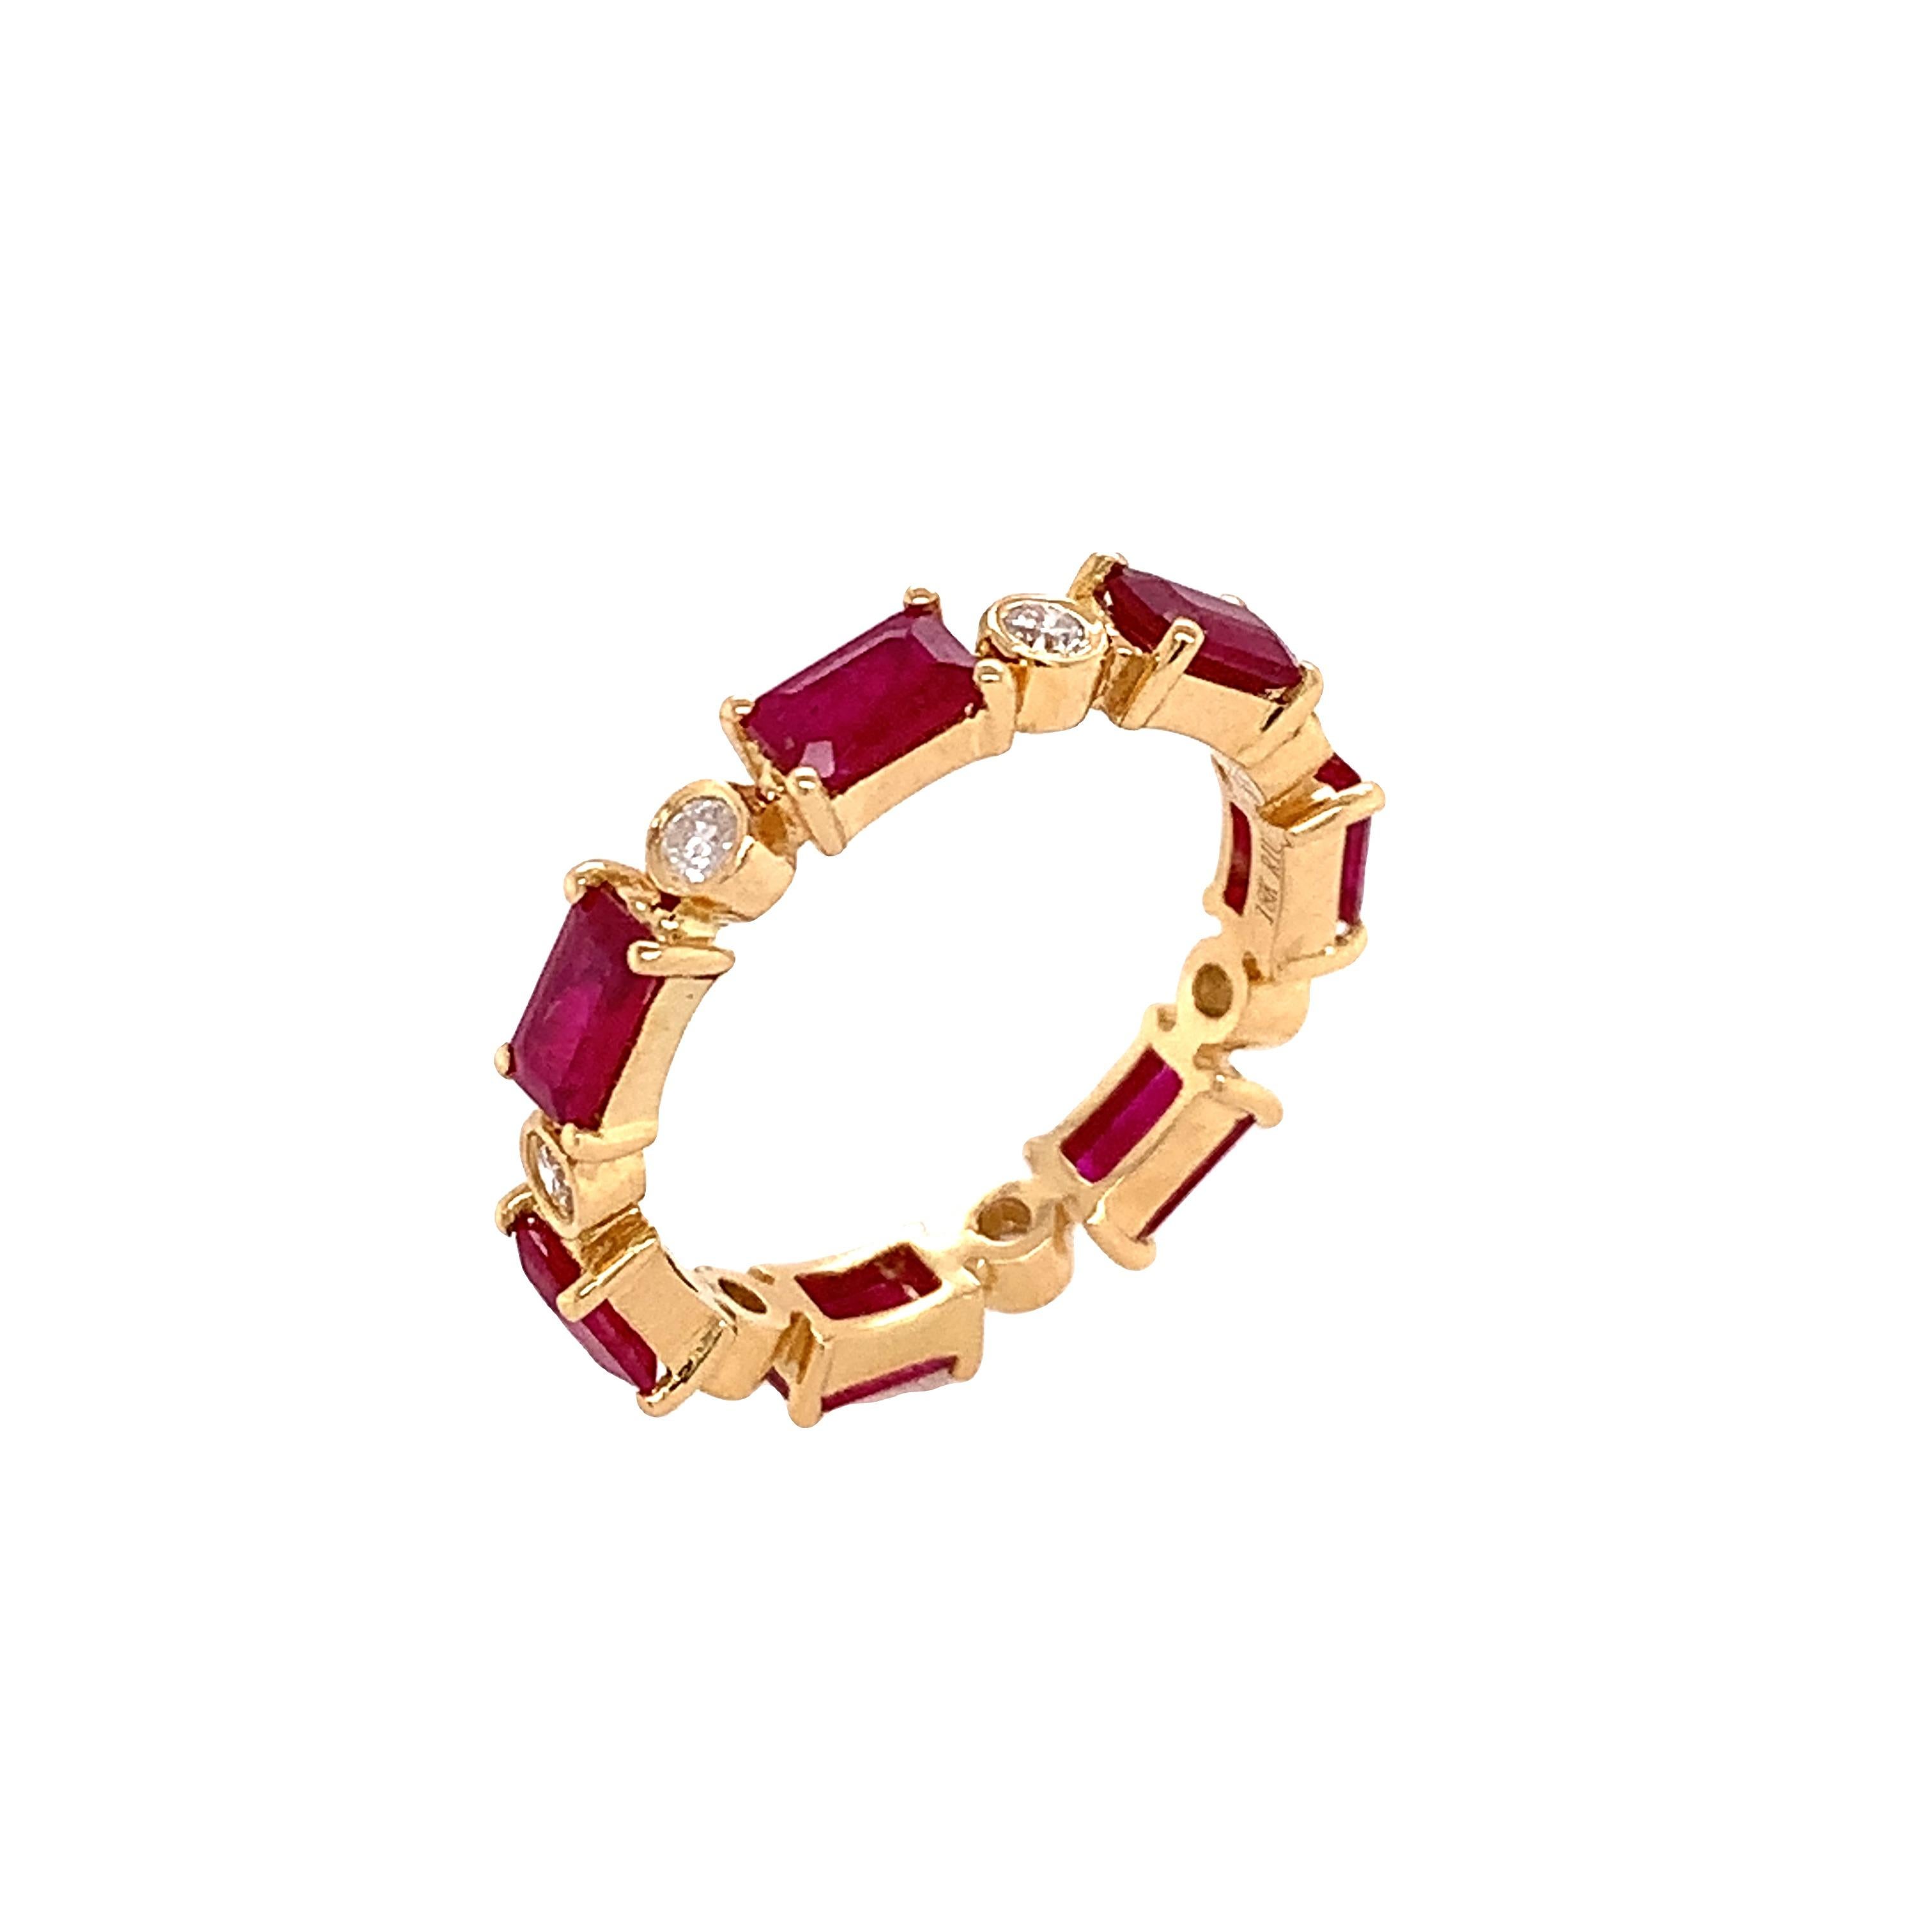 18K Yellow Gold
Ruby: 2.01ct total weight.
Diamond: 0.19ct total weight.
All diamonds are G-H/SI stones.